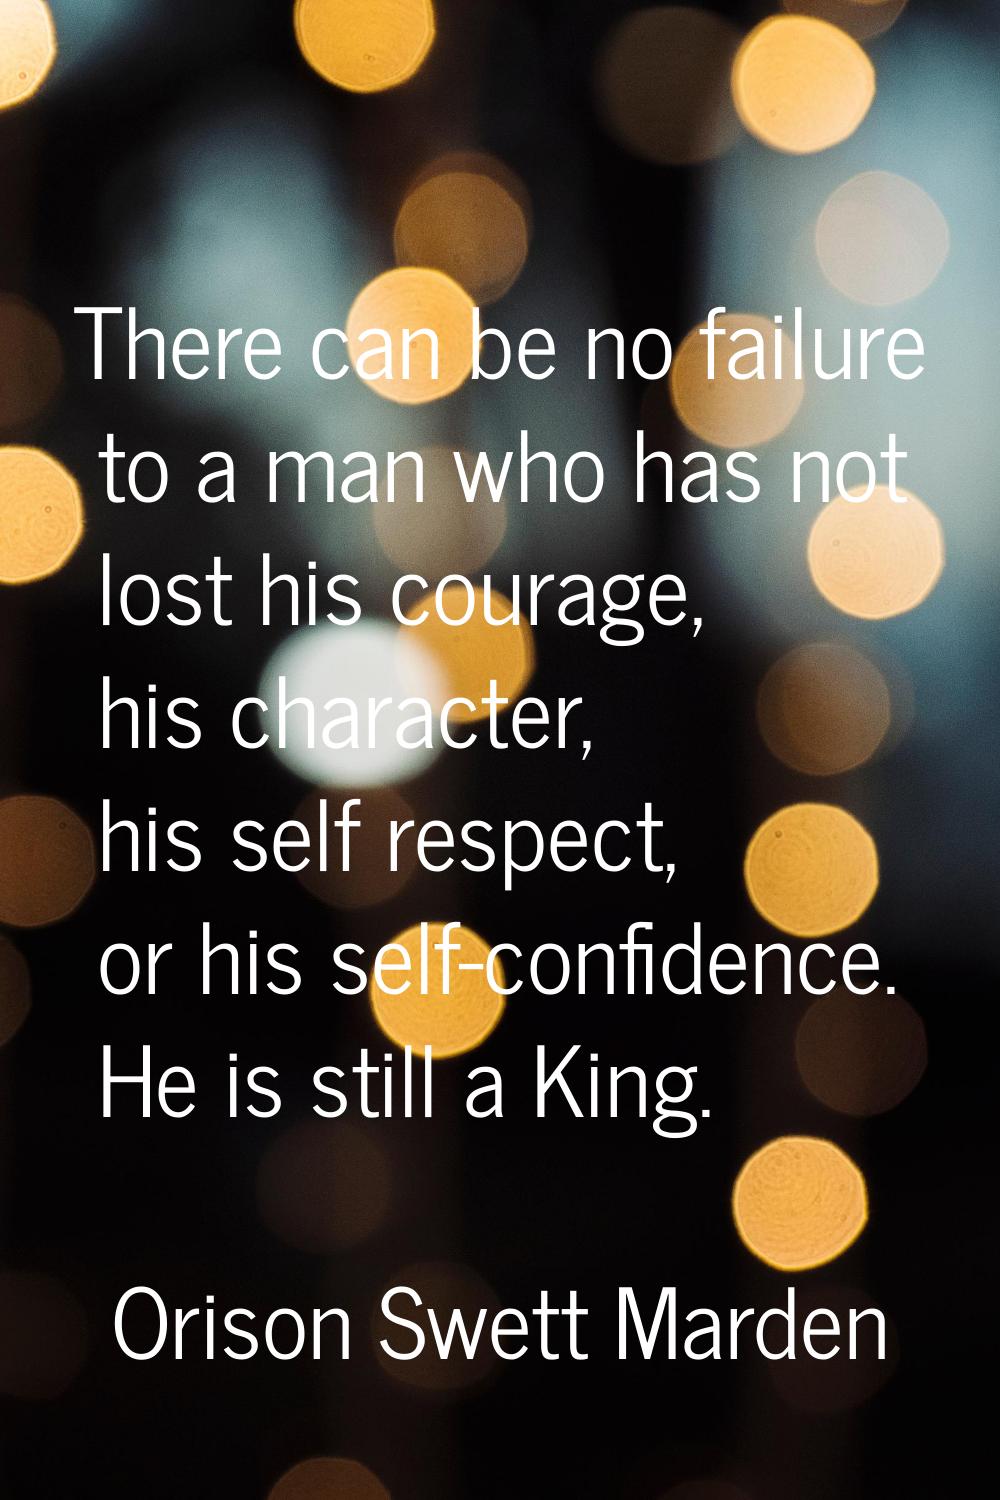 There can be no failure to a man who has not lost his courage, his character, his self respect, or 